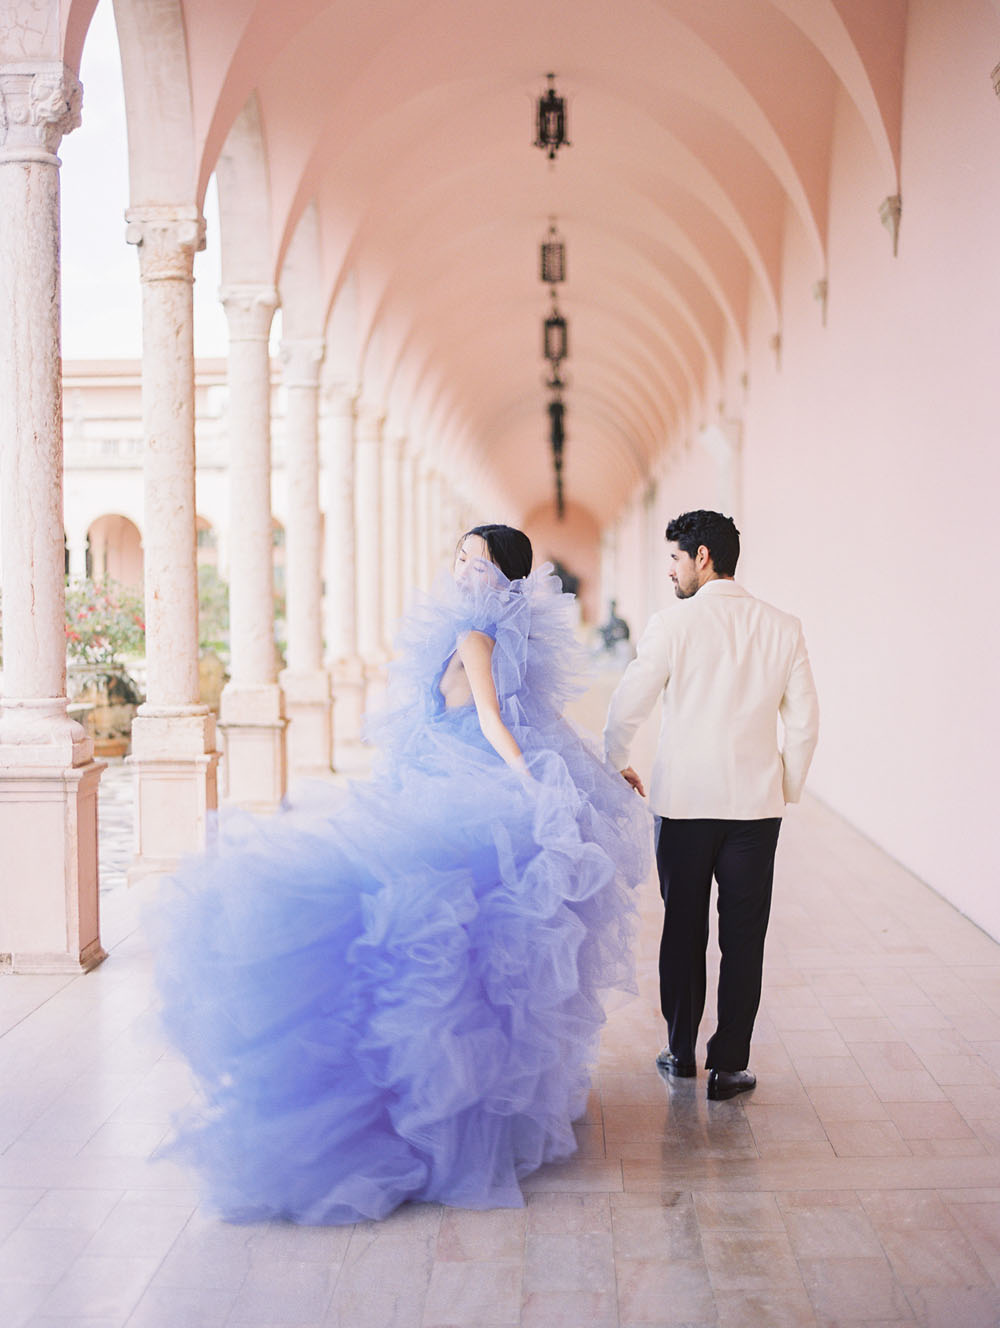 Romantic elopement inspo with a purple tulle gown